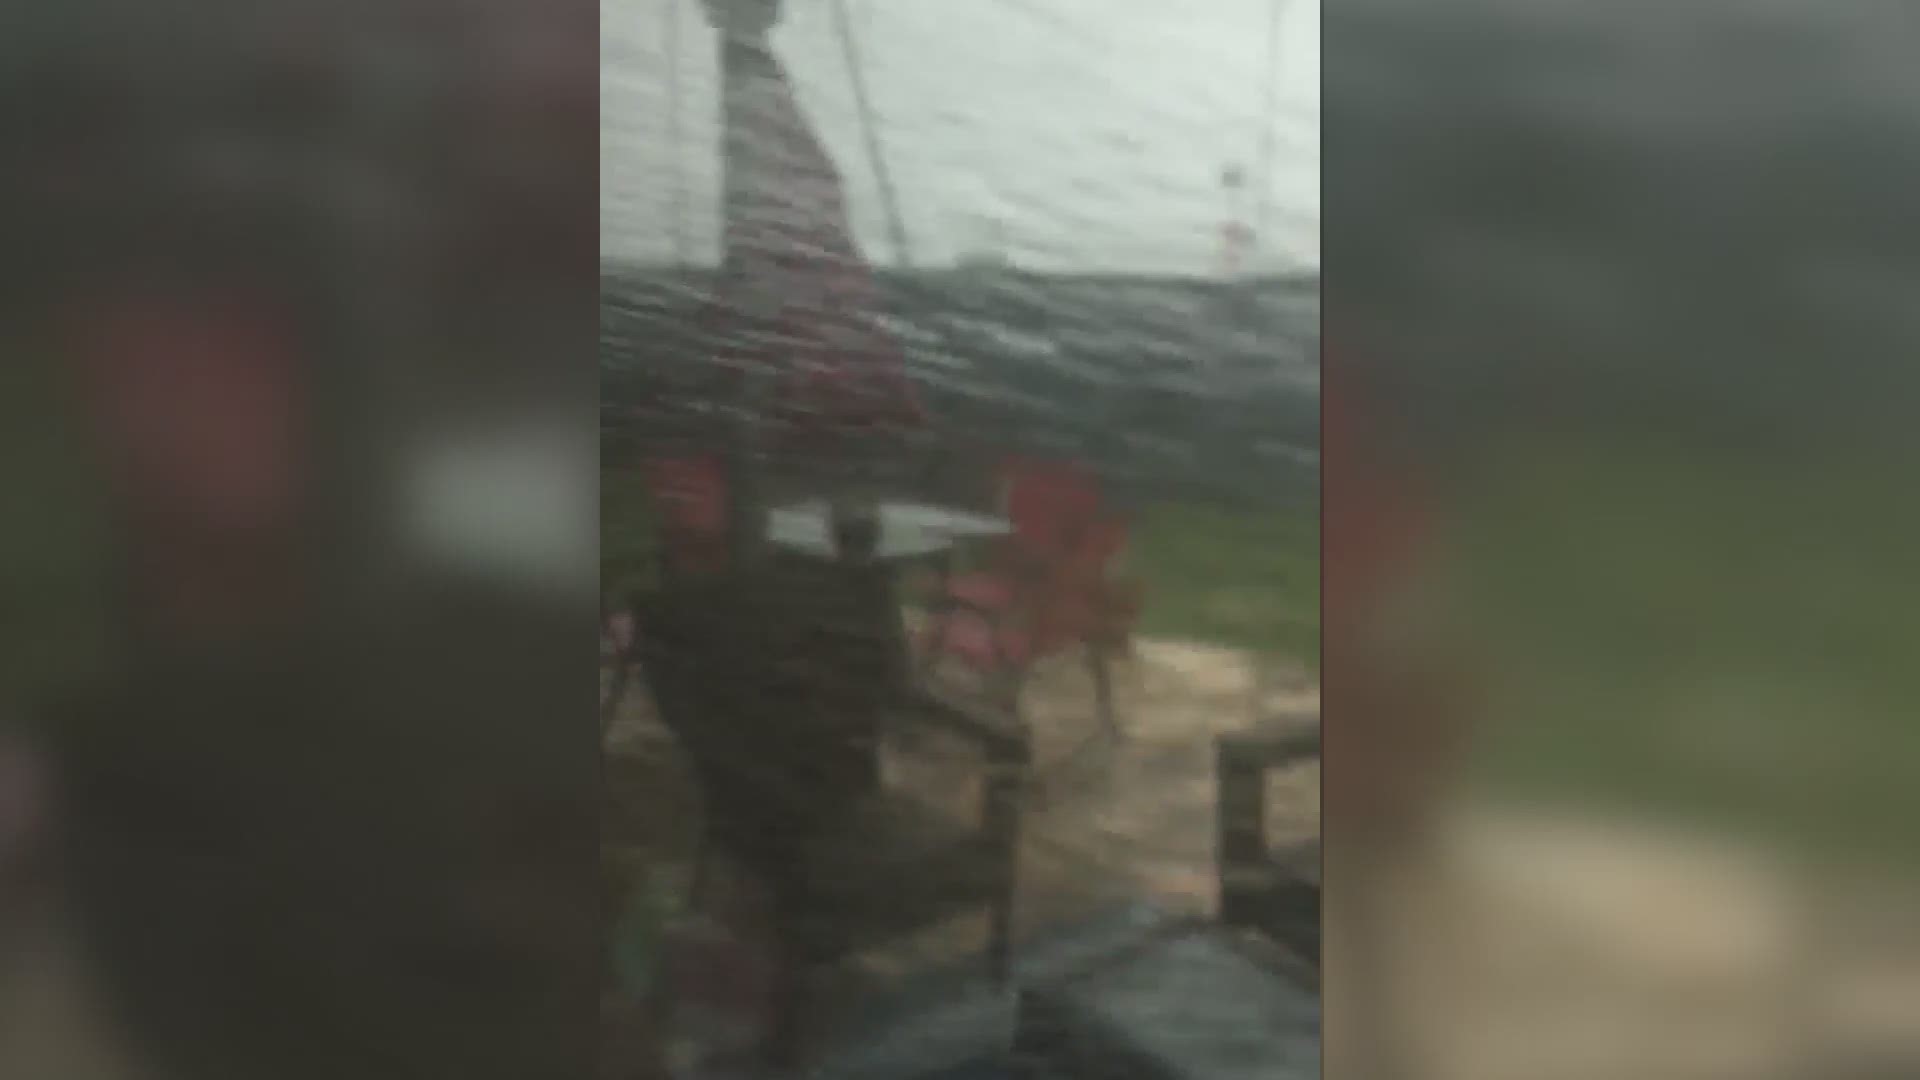 Dana Medel of Leander sent KVUE this video of strong winds completely knocking over her patio furniture.